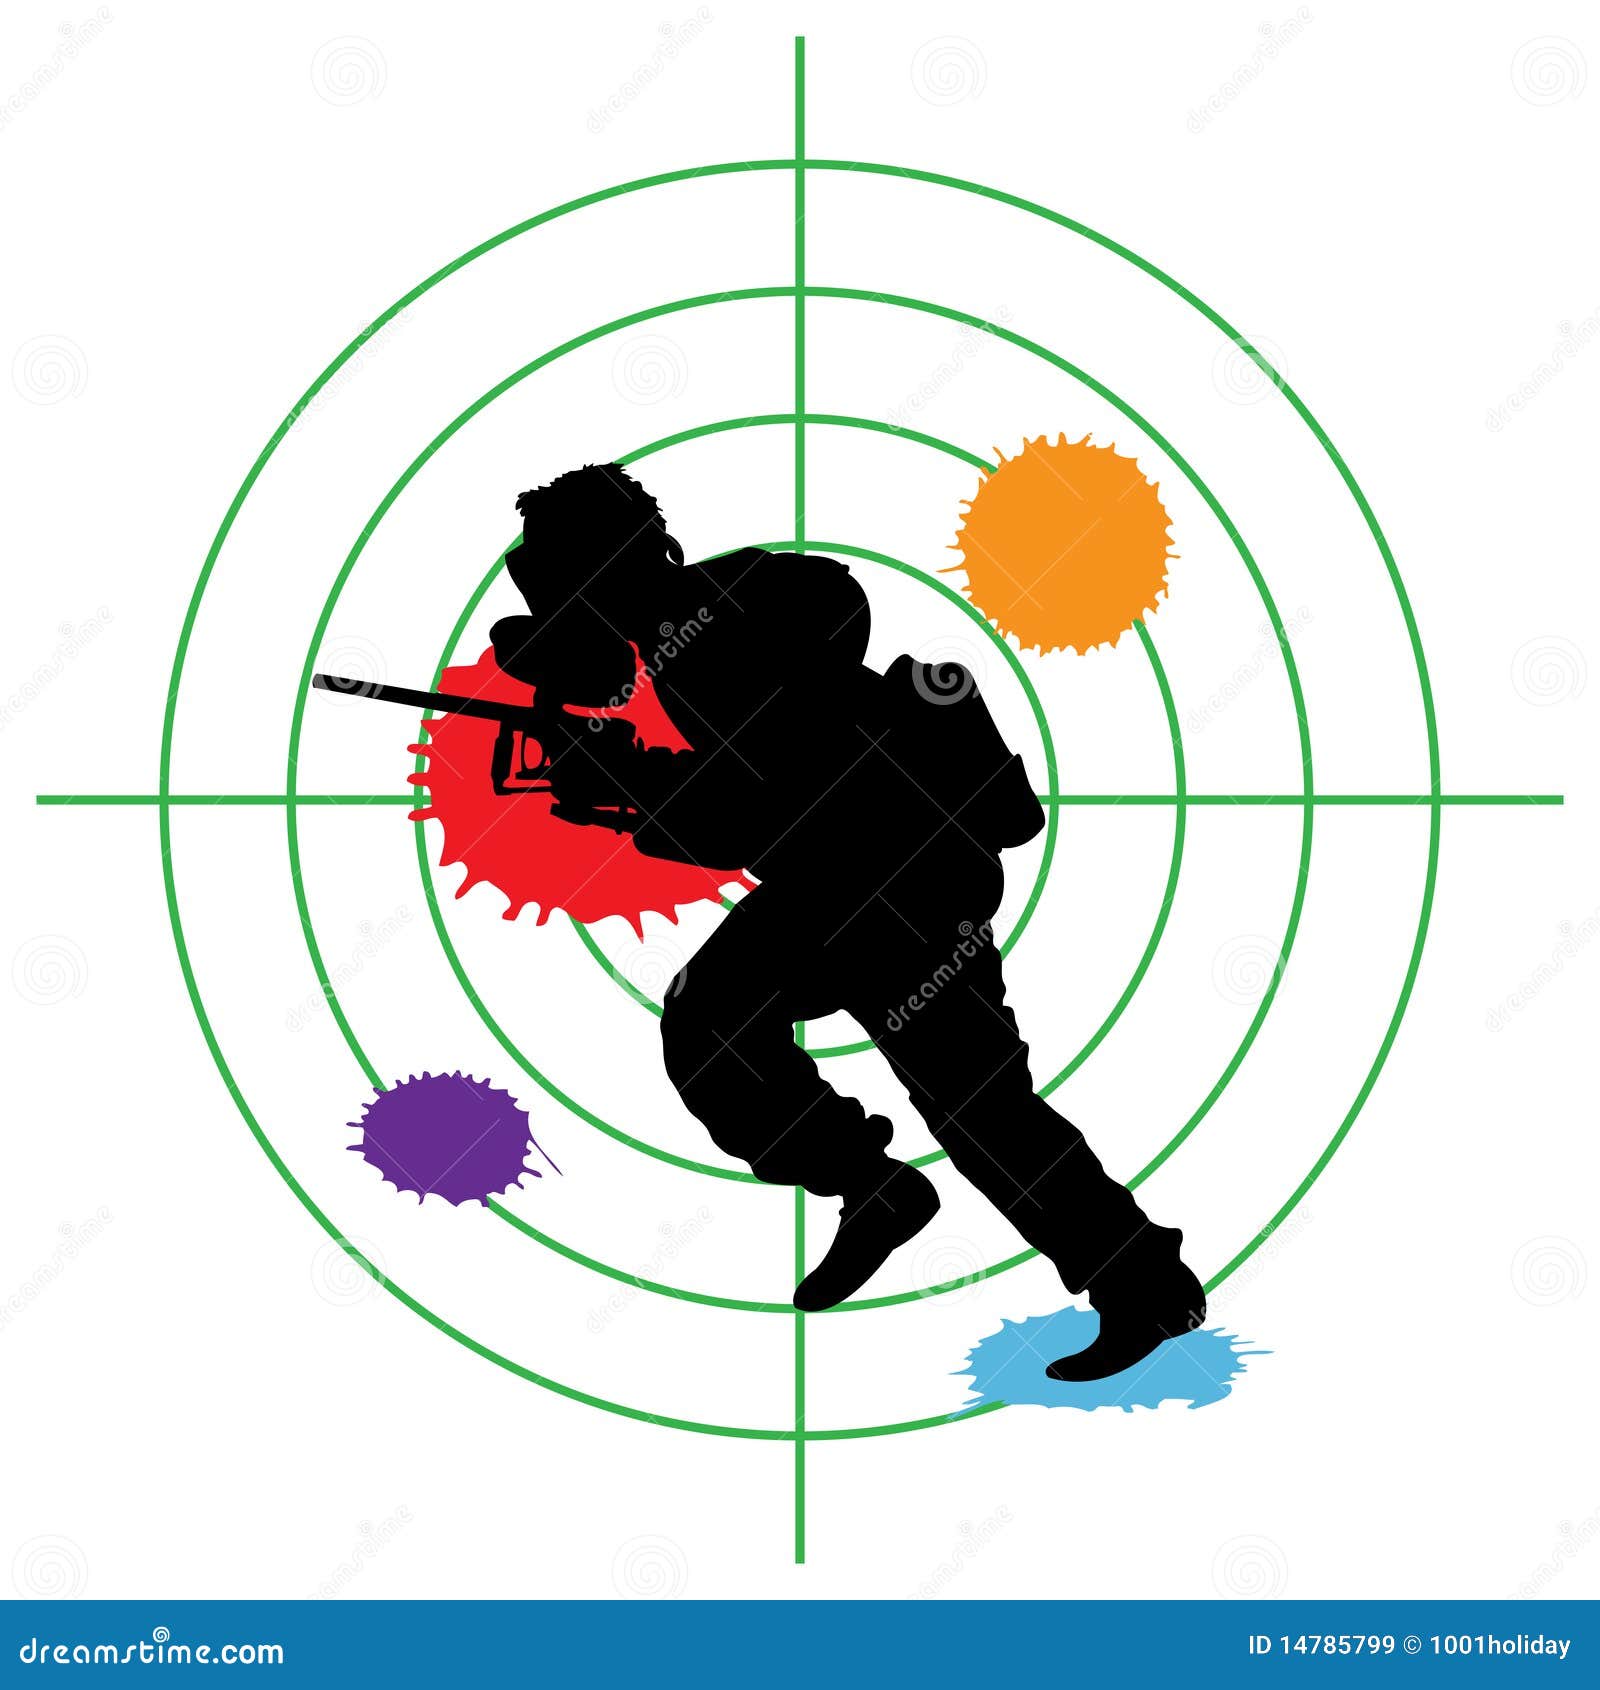 Paintball Target Royalty Free Stock Images - Image: 14785799